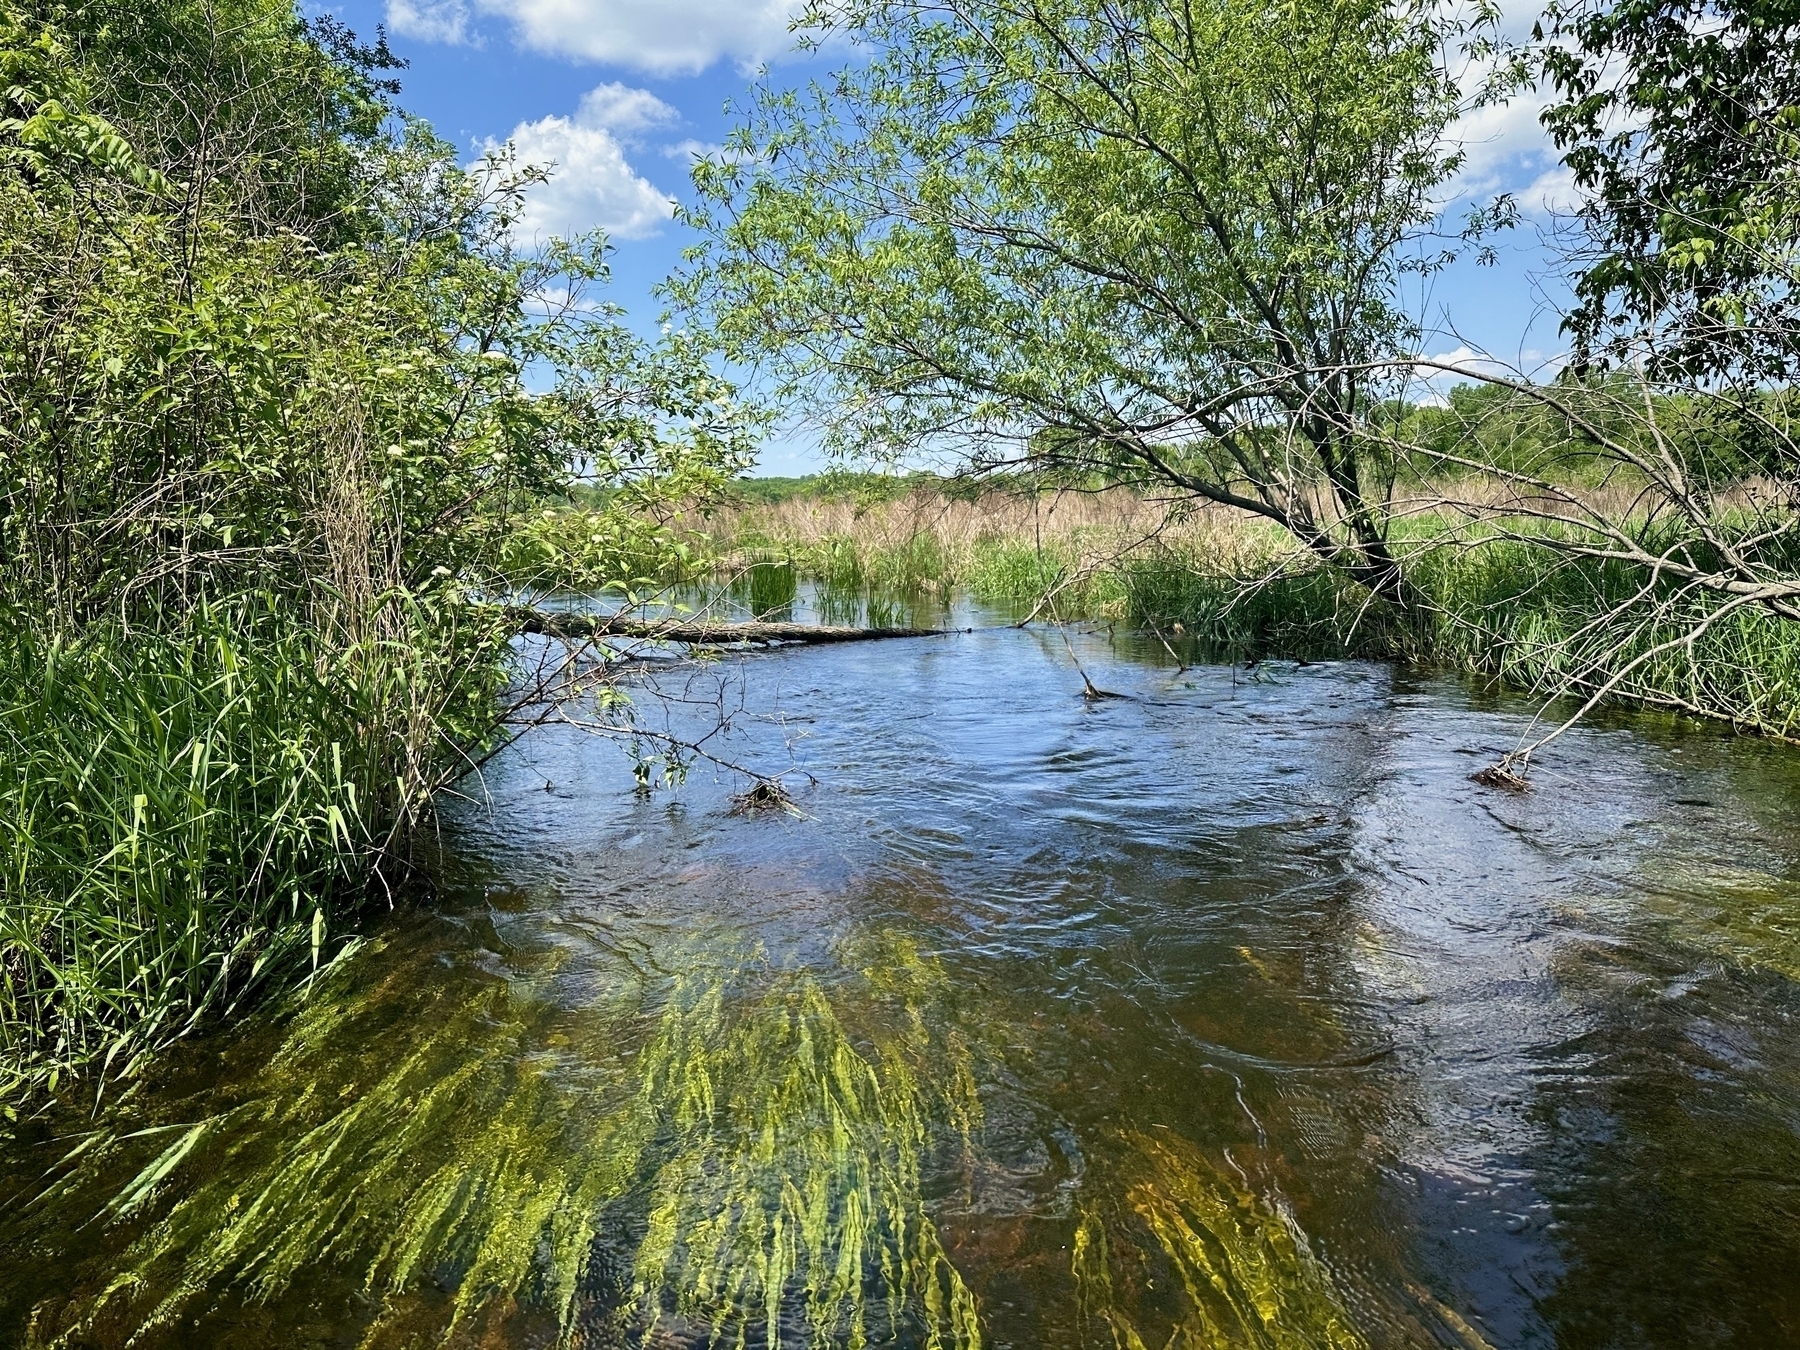 A shallow stream with clear water flows through a lush, tree-lined landscape on a sunny day, with underwater plants visible through the surface.